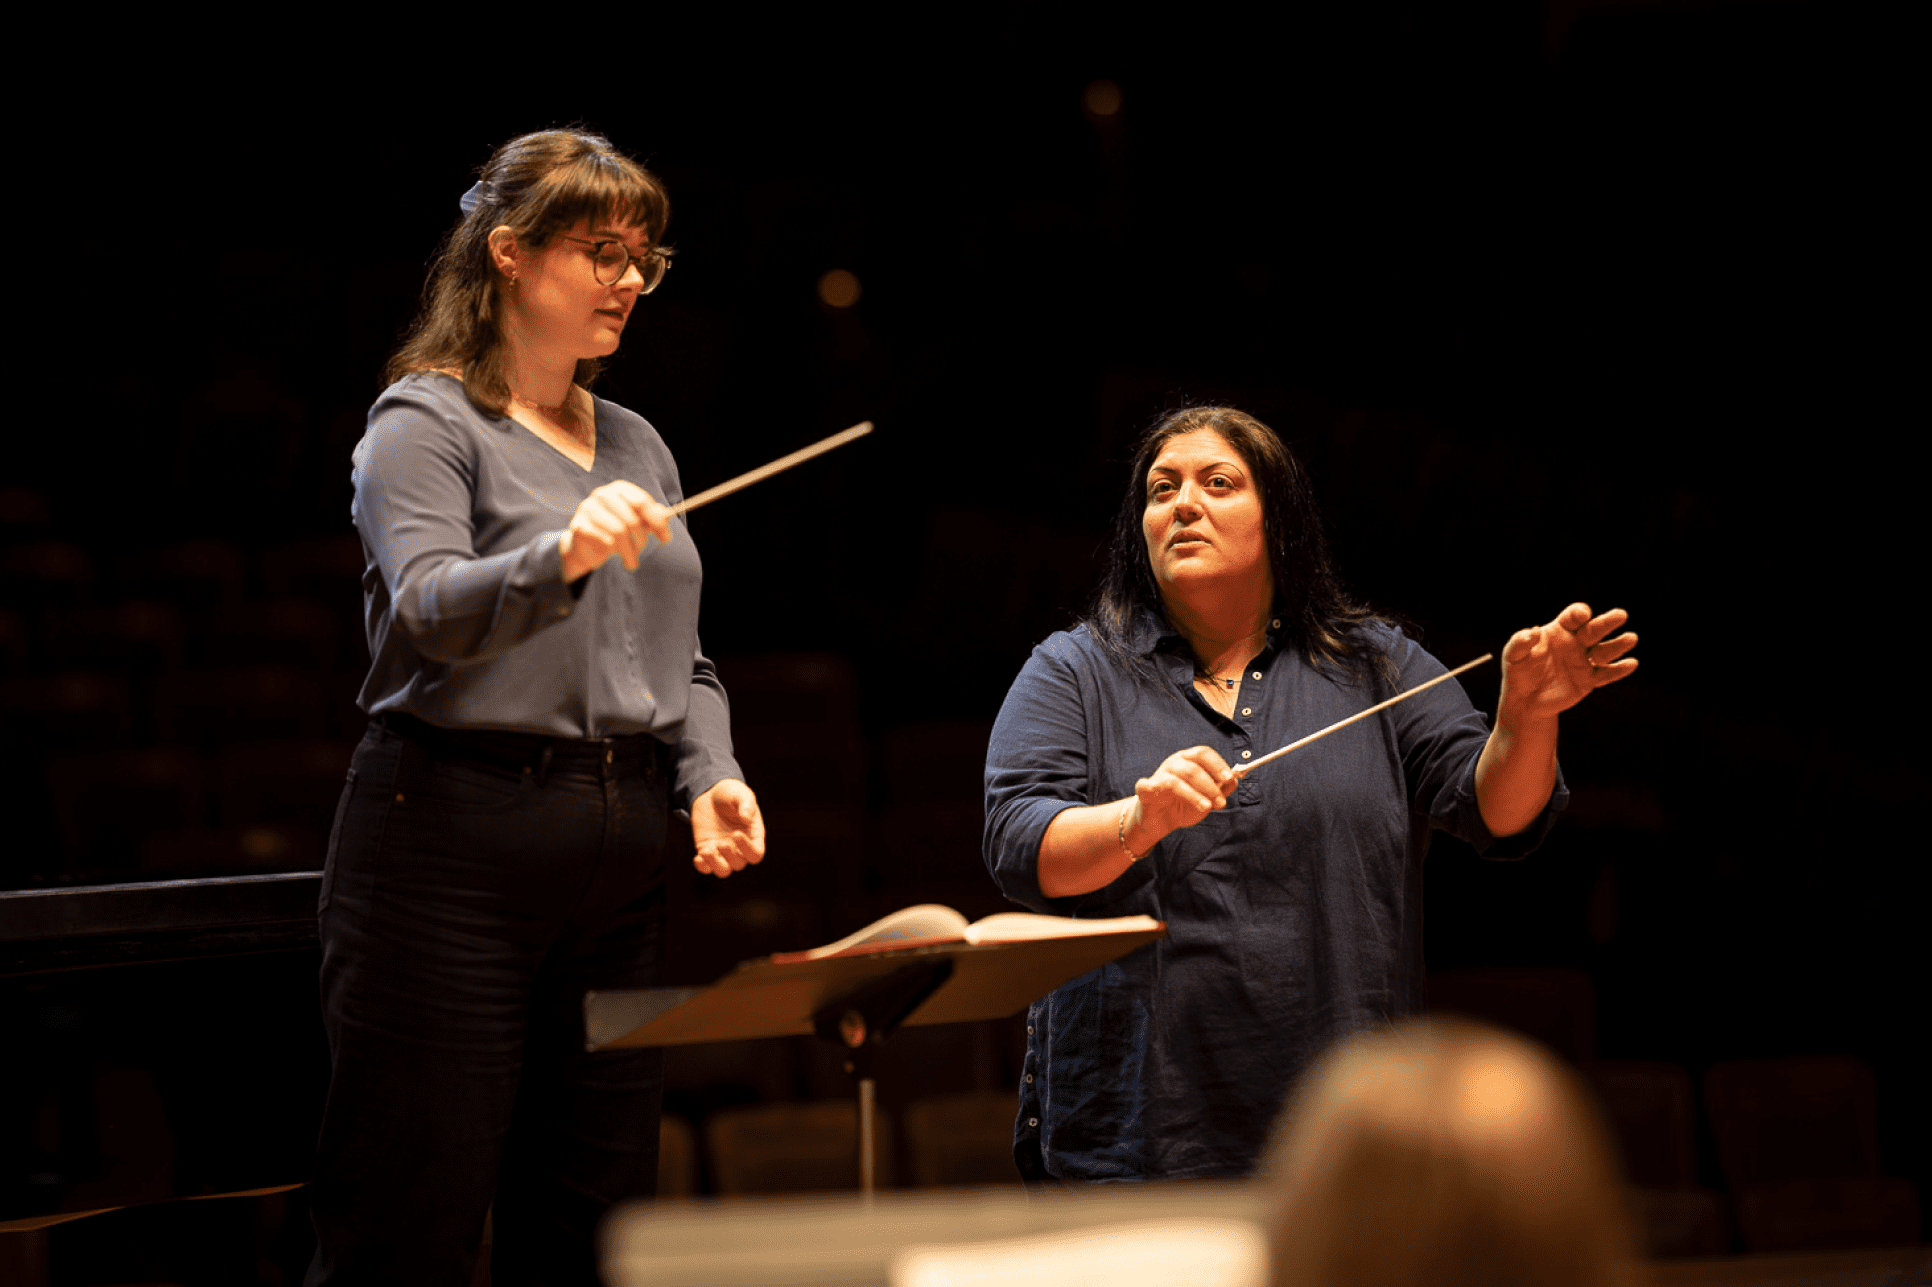 Erica Washburn coaching a conducting student on stage